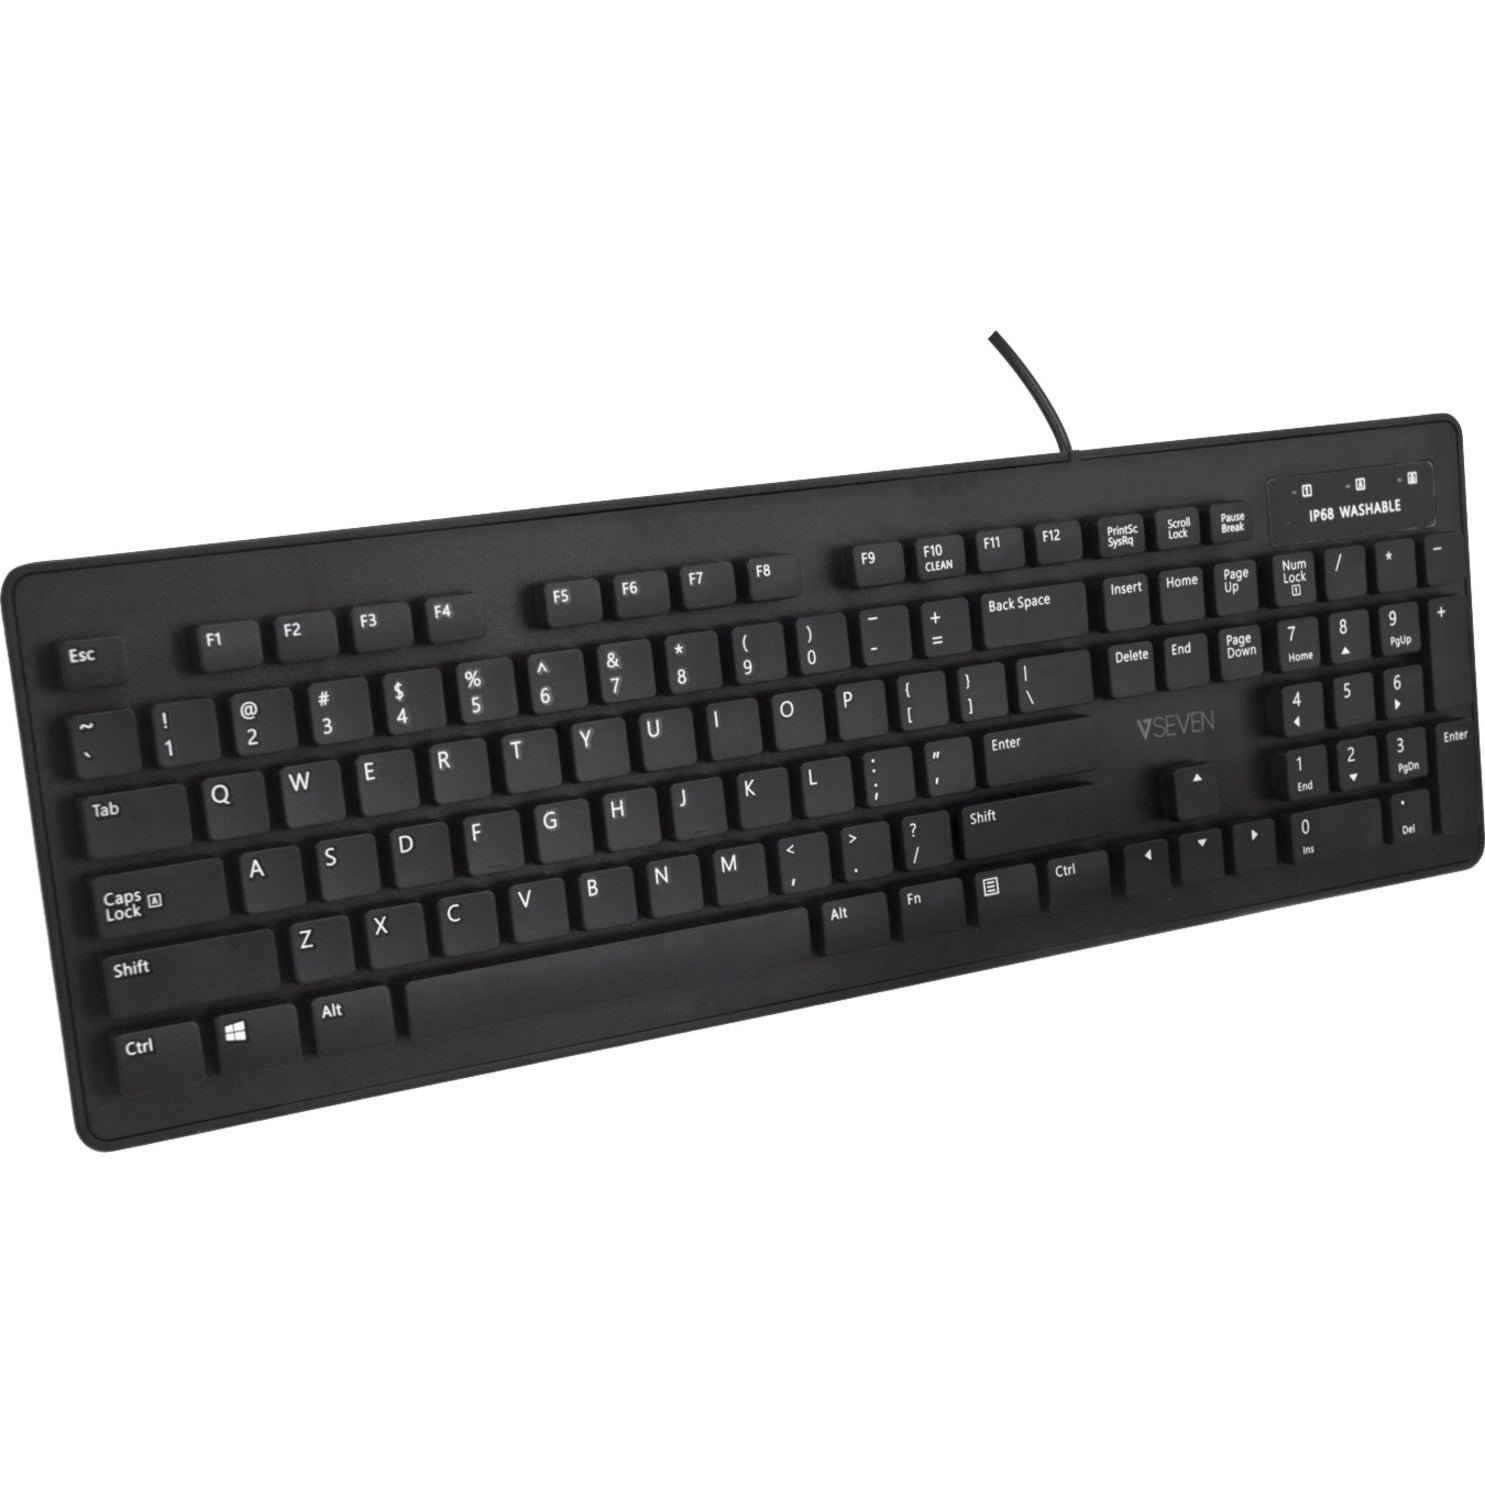 V7 CKU700US Washable Antimicrobial Keyboard & Mouse Combo, Water Proof, Dust Proof, USB Connectivity